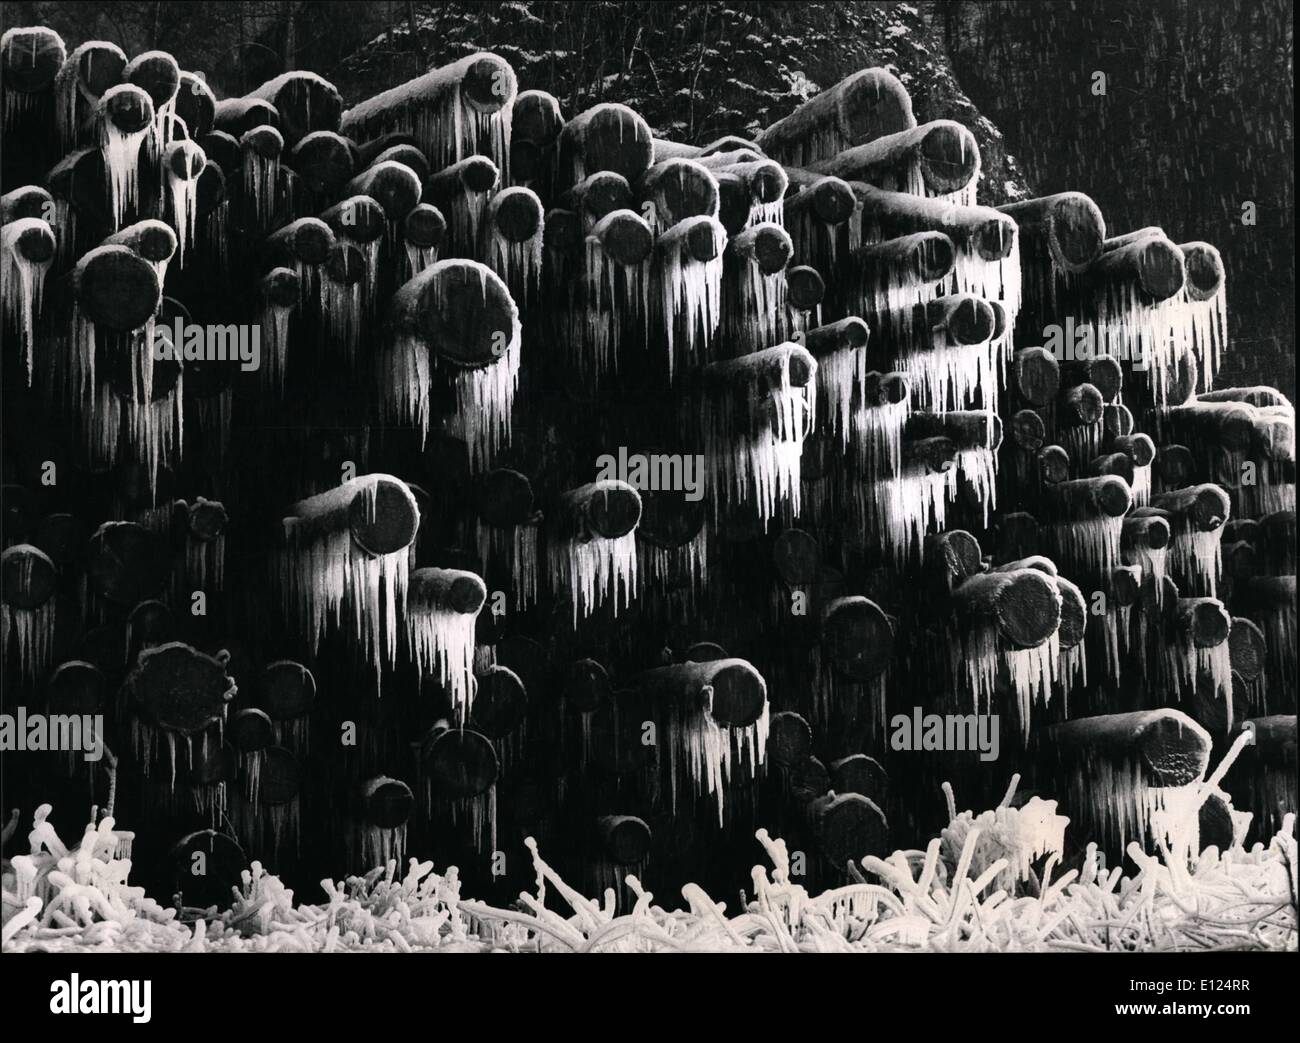 Dec. 12, 1990 - ice Stalactites: Stalactites form a interesting pattern as they hang from tree trunks in a lumber Yard in Giswil, central Switzerland, Dec. 5. Water used to dowse the wood as protection from bark beetles, and the freezing temperatures joined together to form the scene. Stock Photo